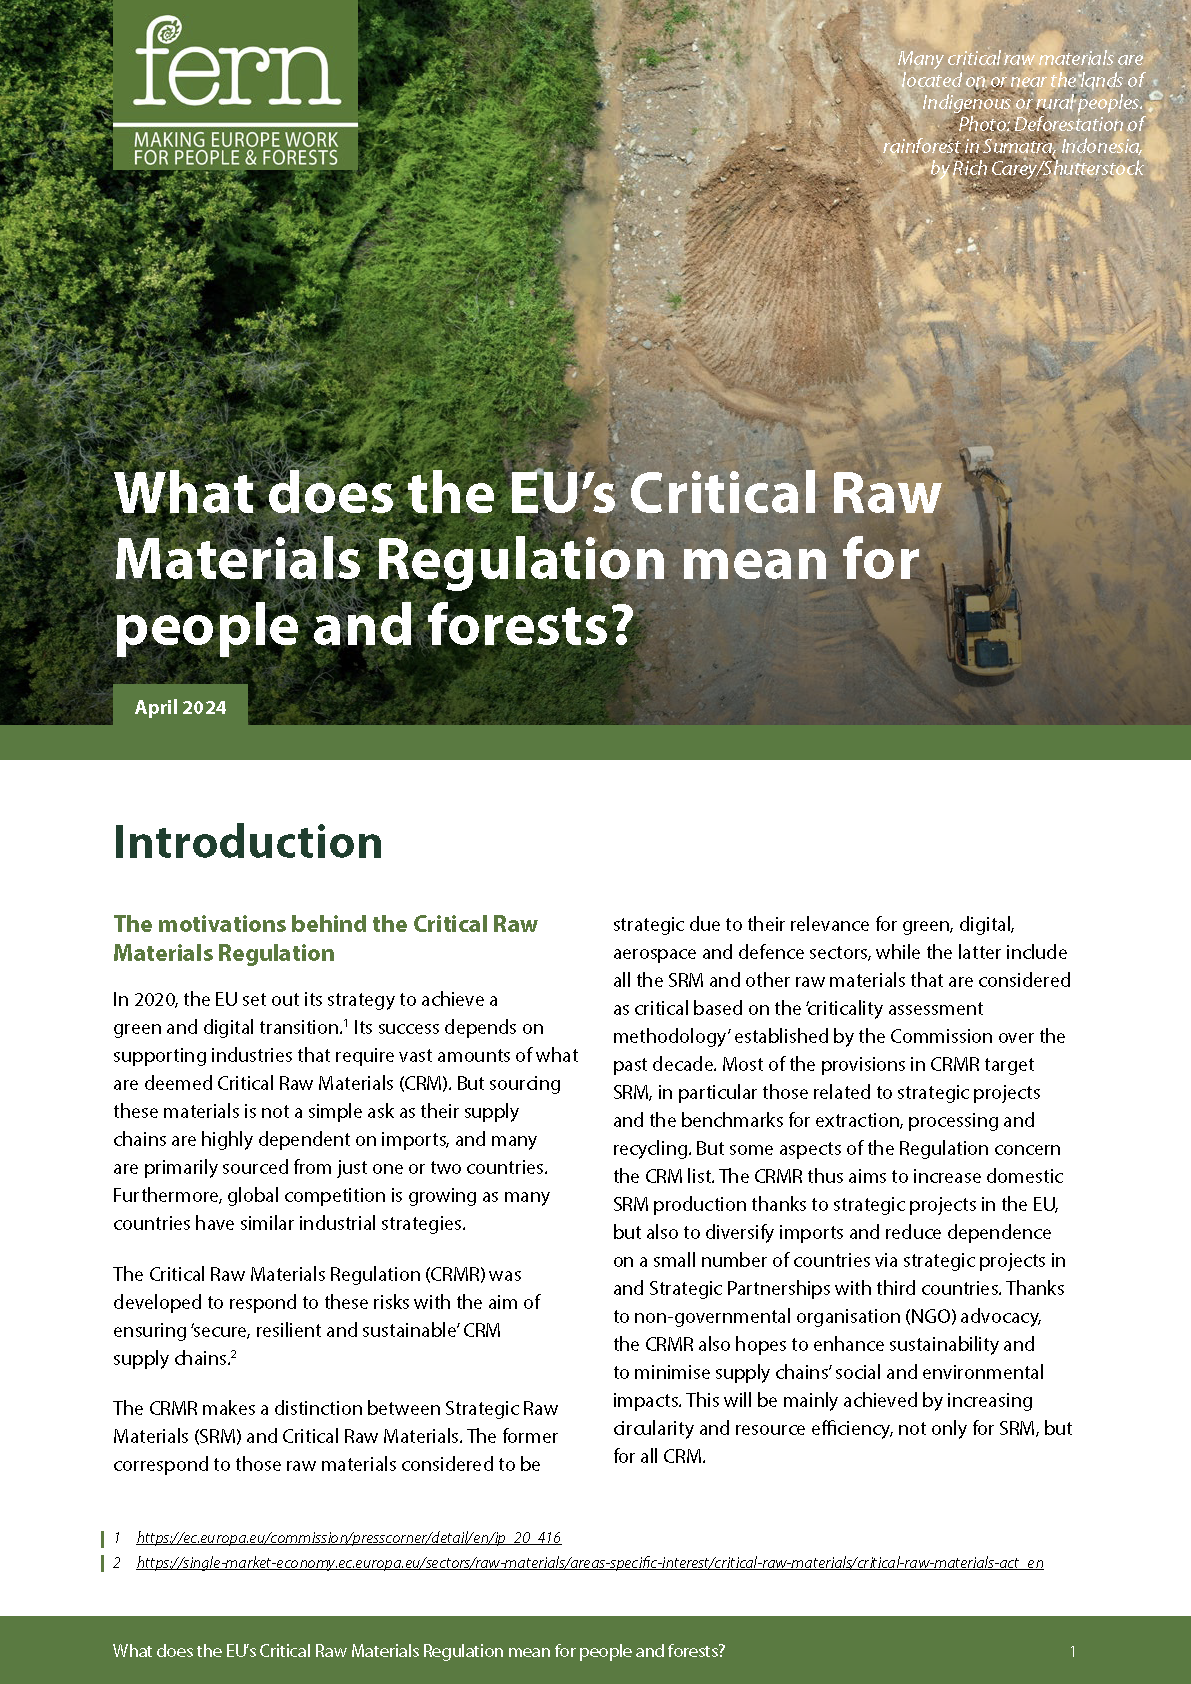 What does the EU’s Critical Raw Materials Regulation mean for people and forests?